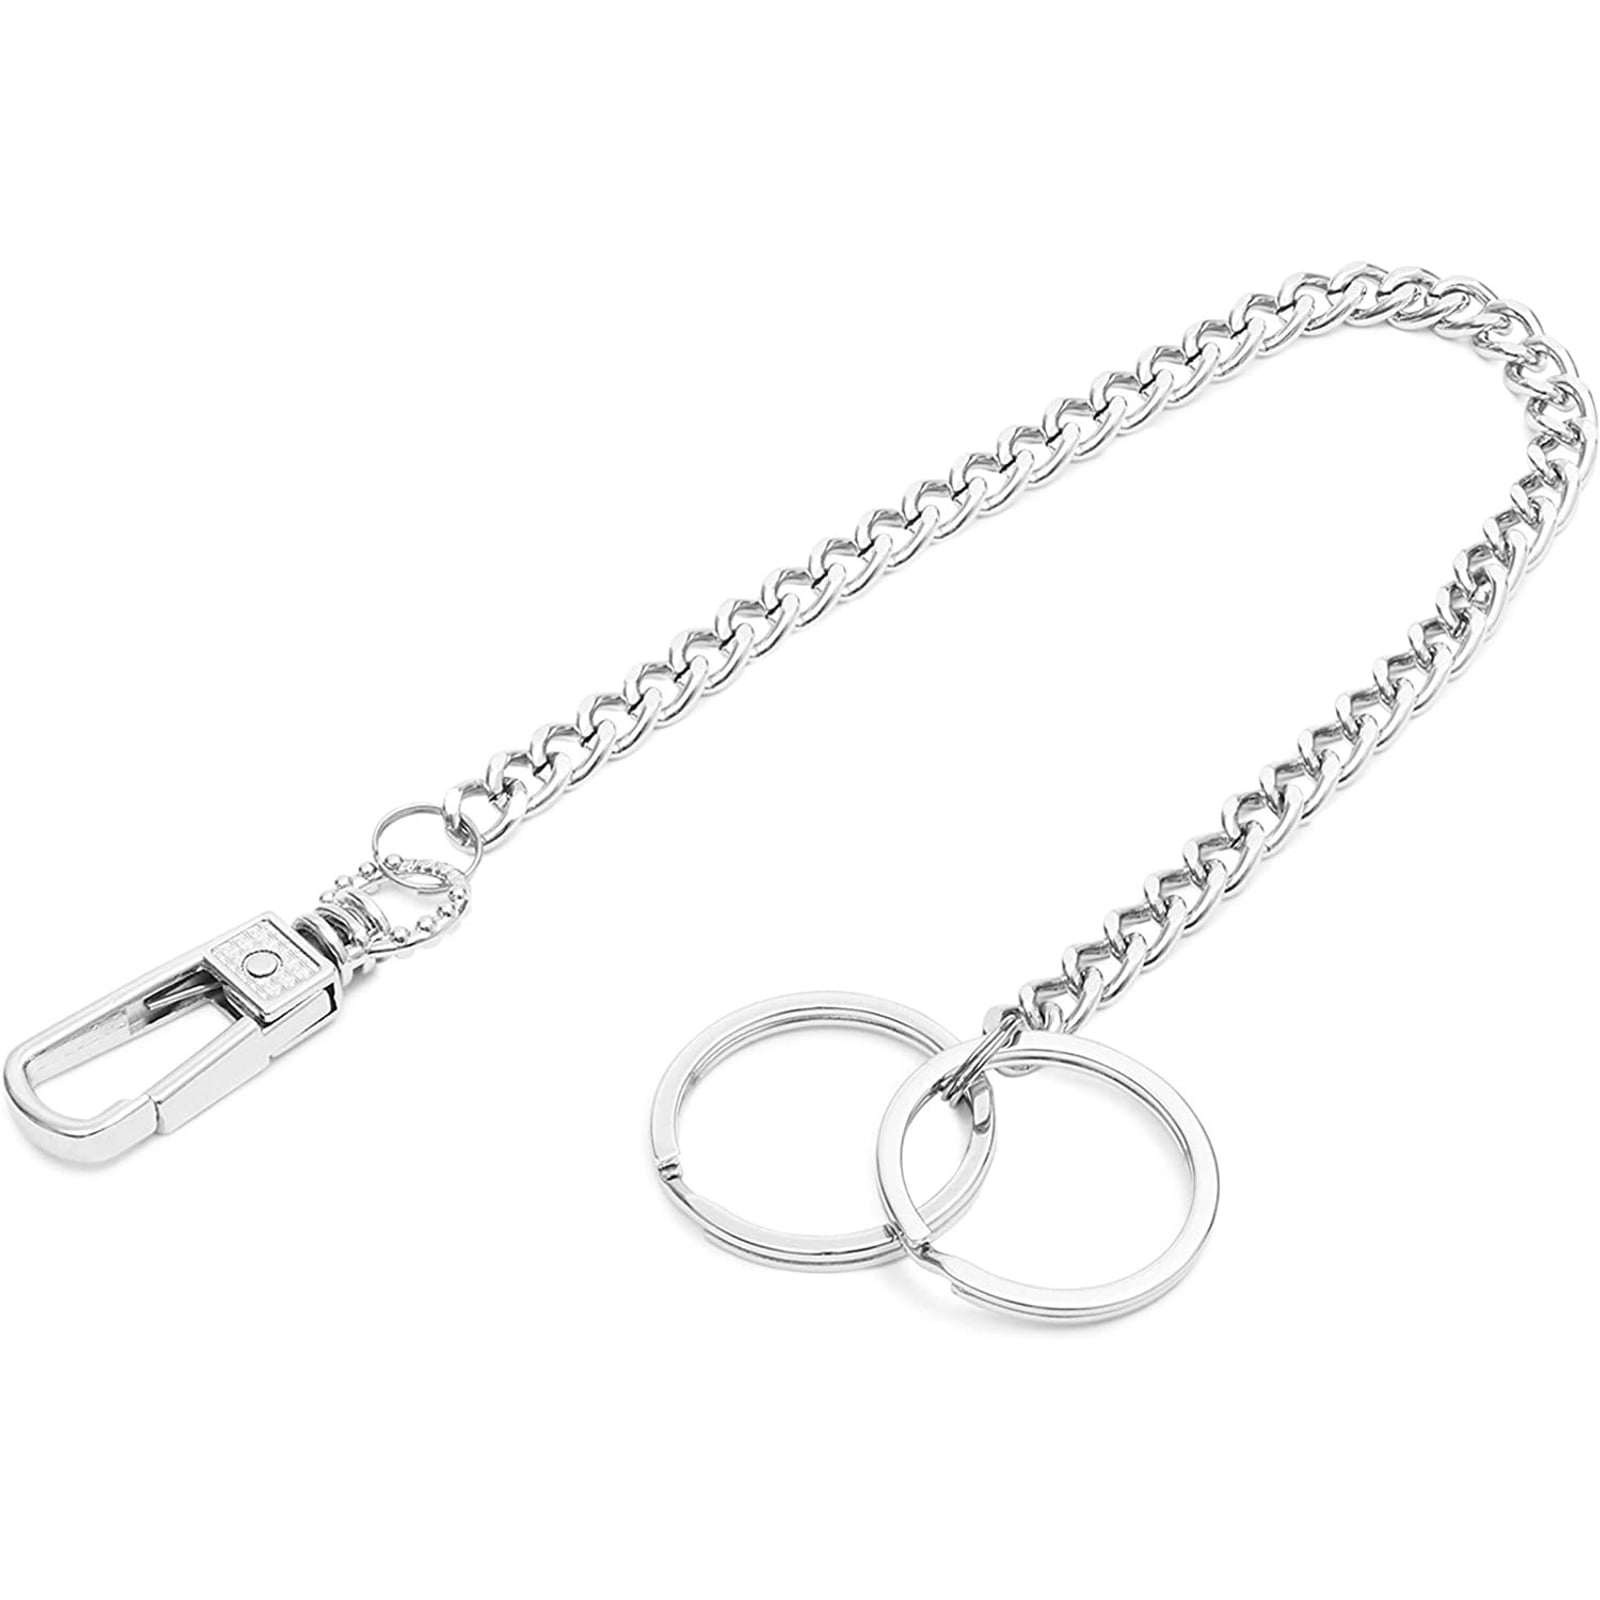 Silver Whites Metal Detector Luggage Bag Dog Buckle Snap Hook Bag Hanger  Lobster Clasp DIY Sewing Handmade Key Chain Button Sewing Tool From Kufire,  $3.9